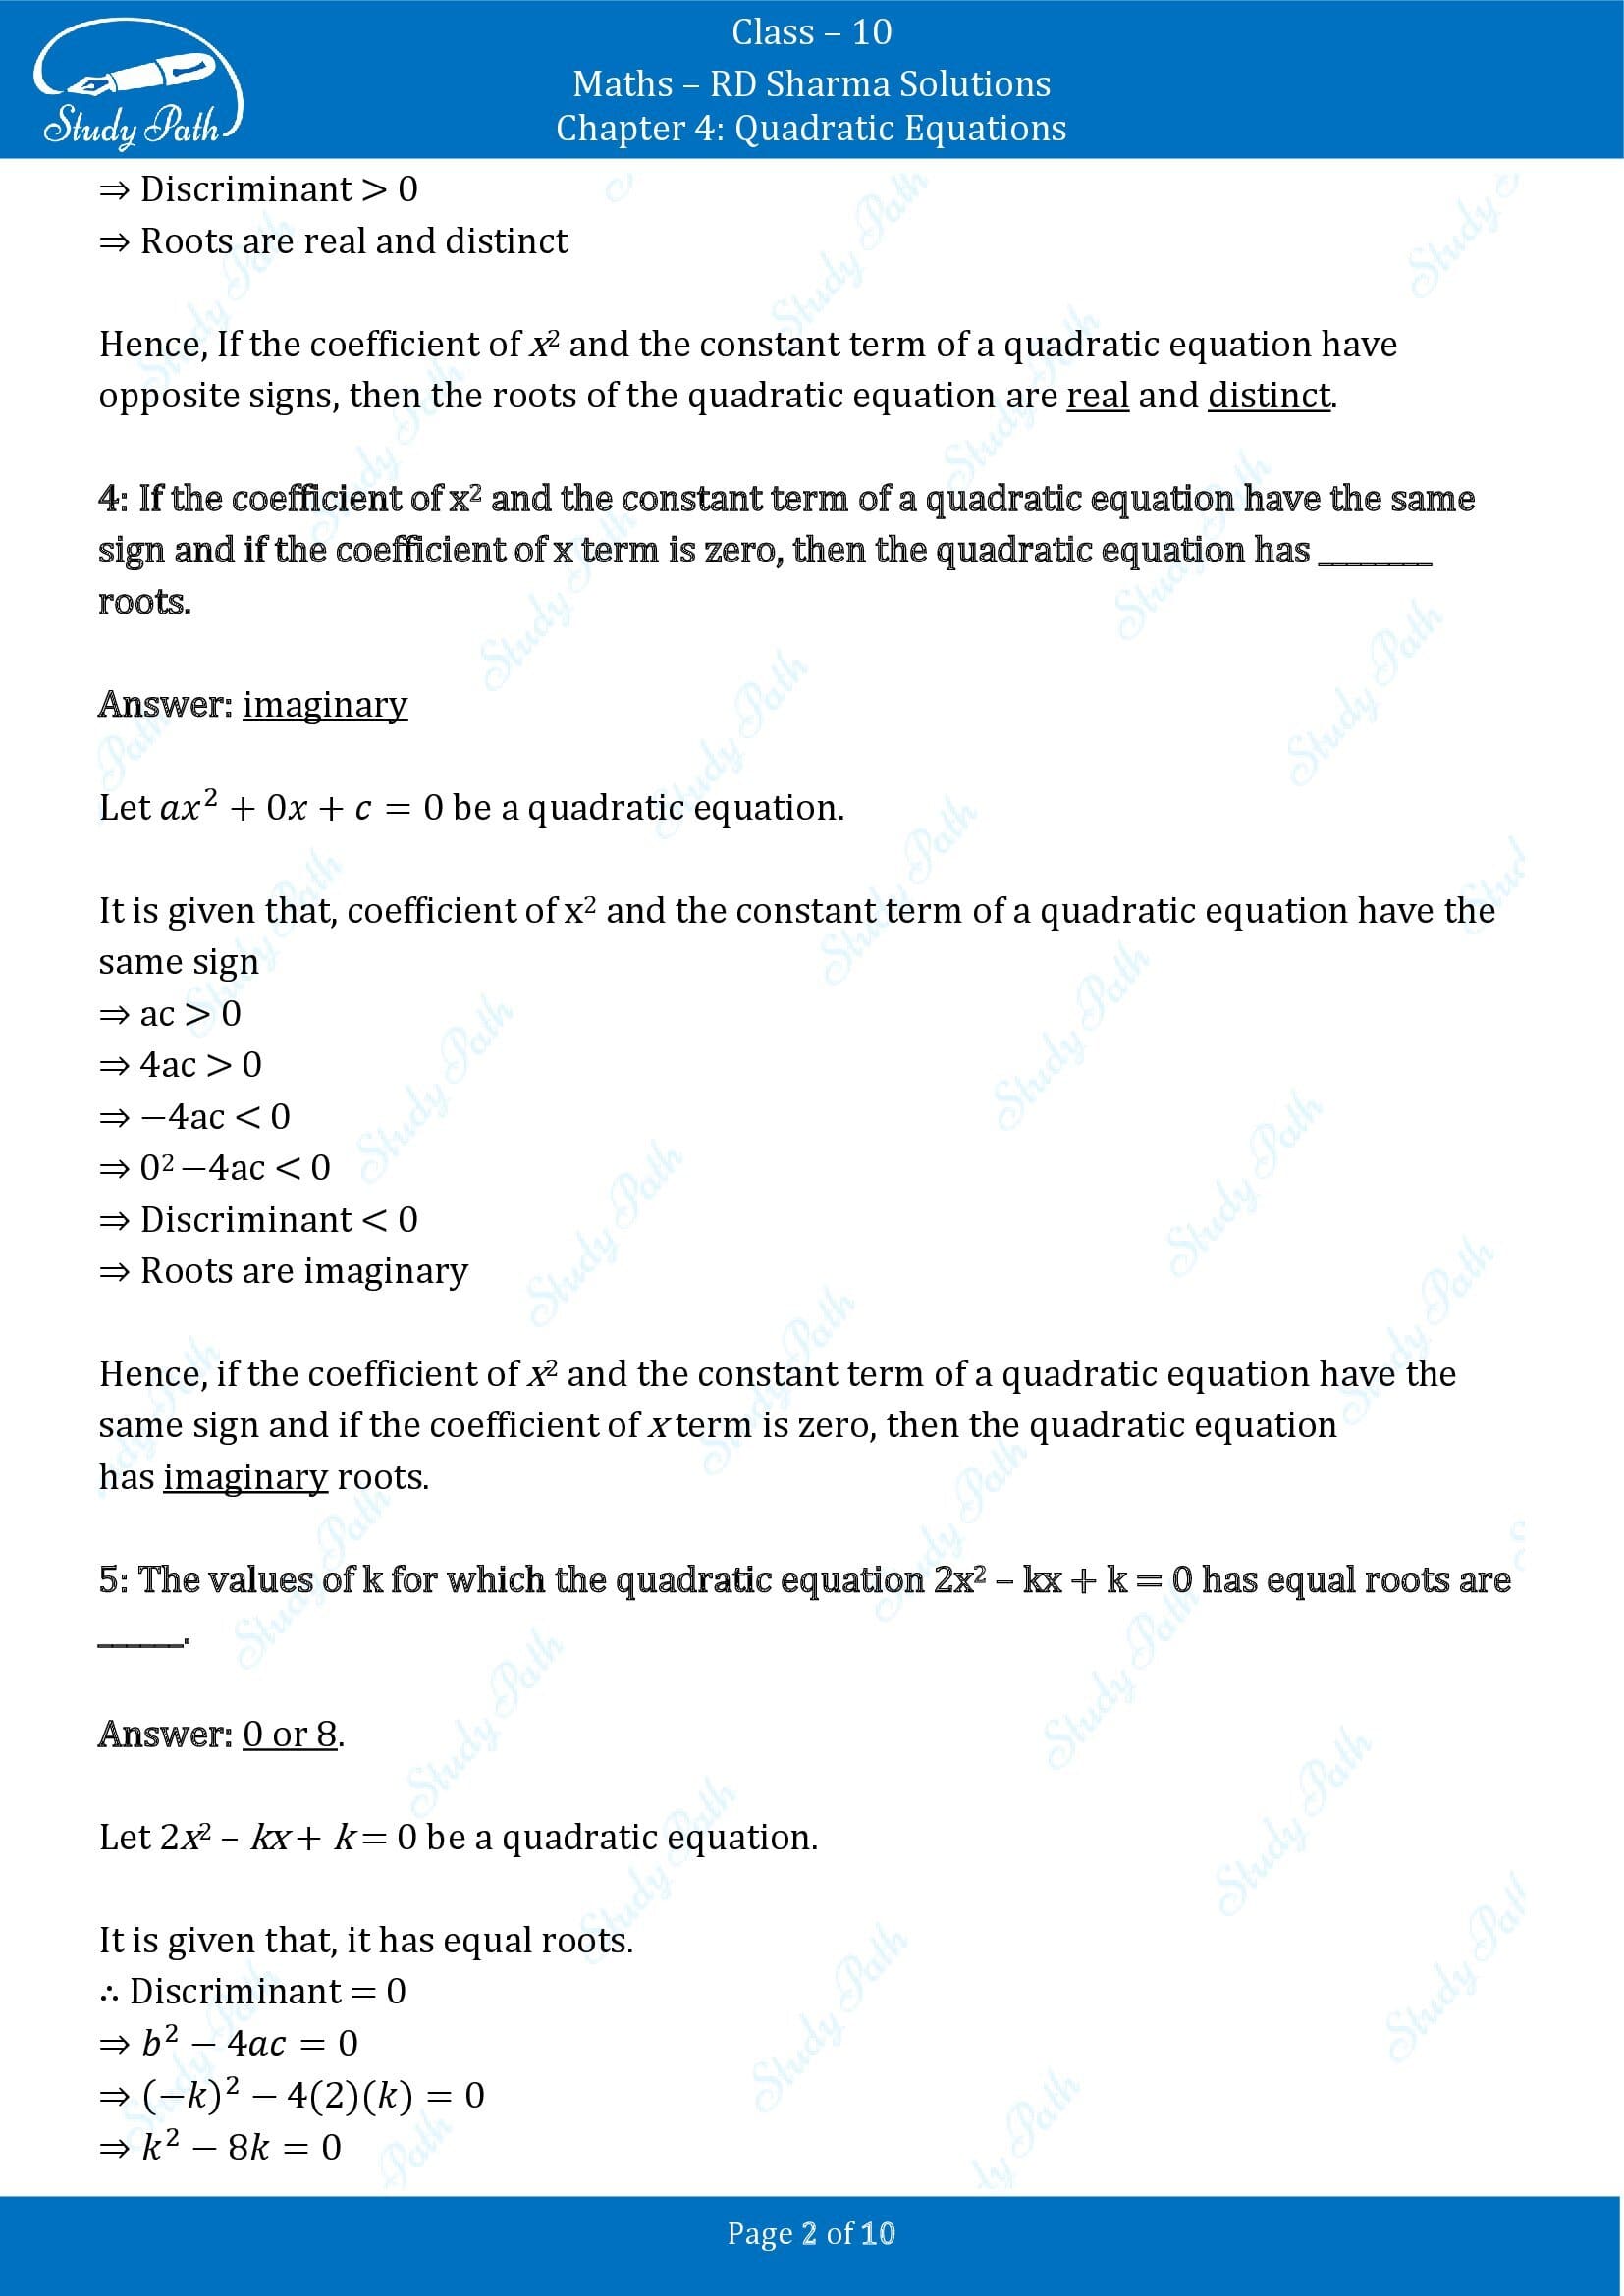 RD Sharma Solutions Class 10 Chapter 4 Quadratic Equations Fill in the Blank Type Questions FBQs 00002